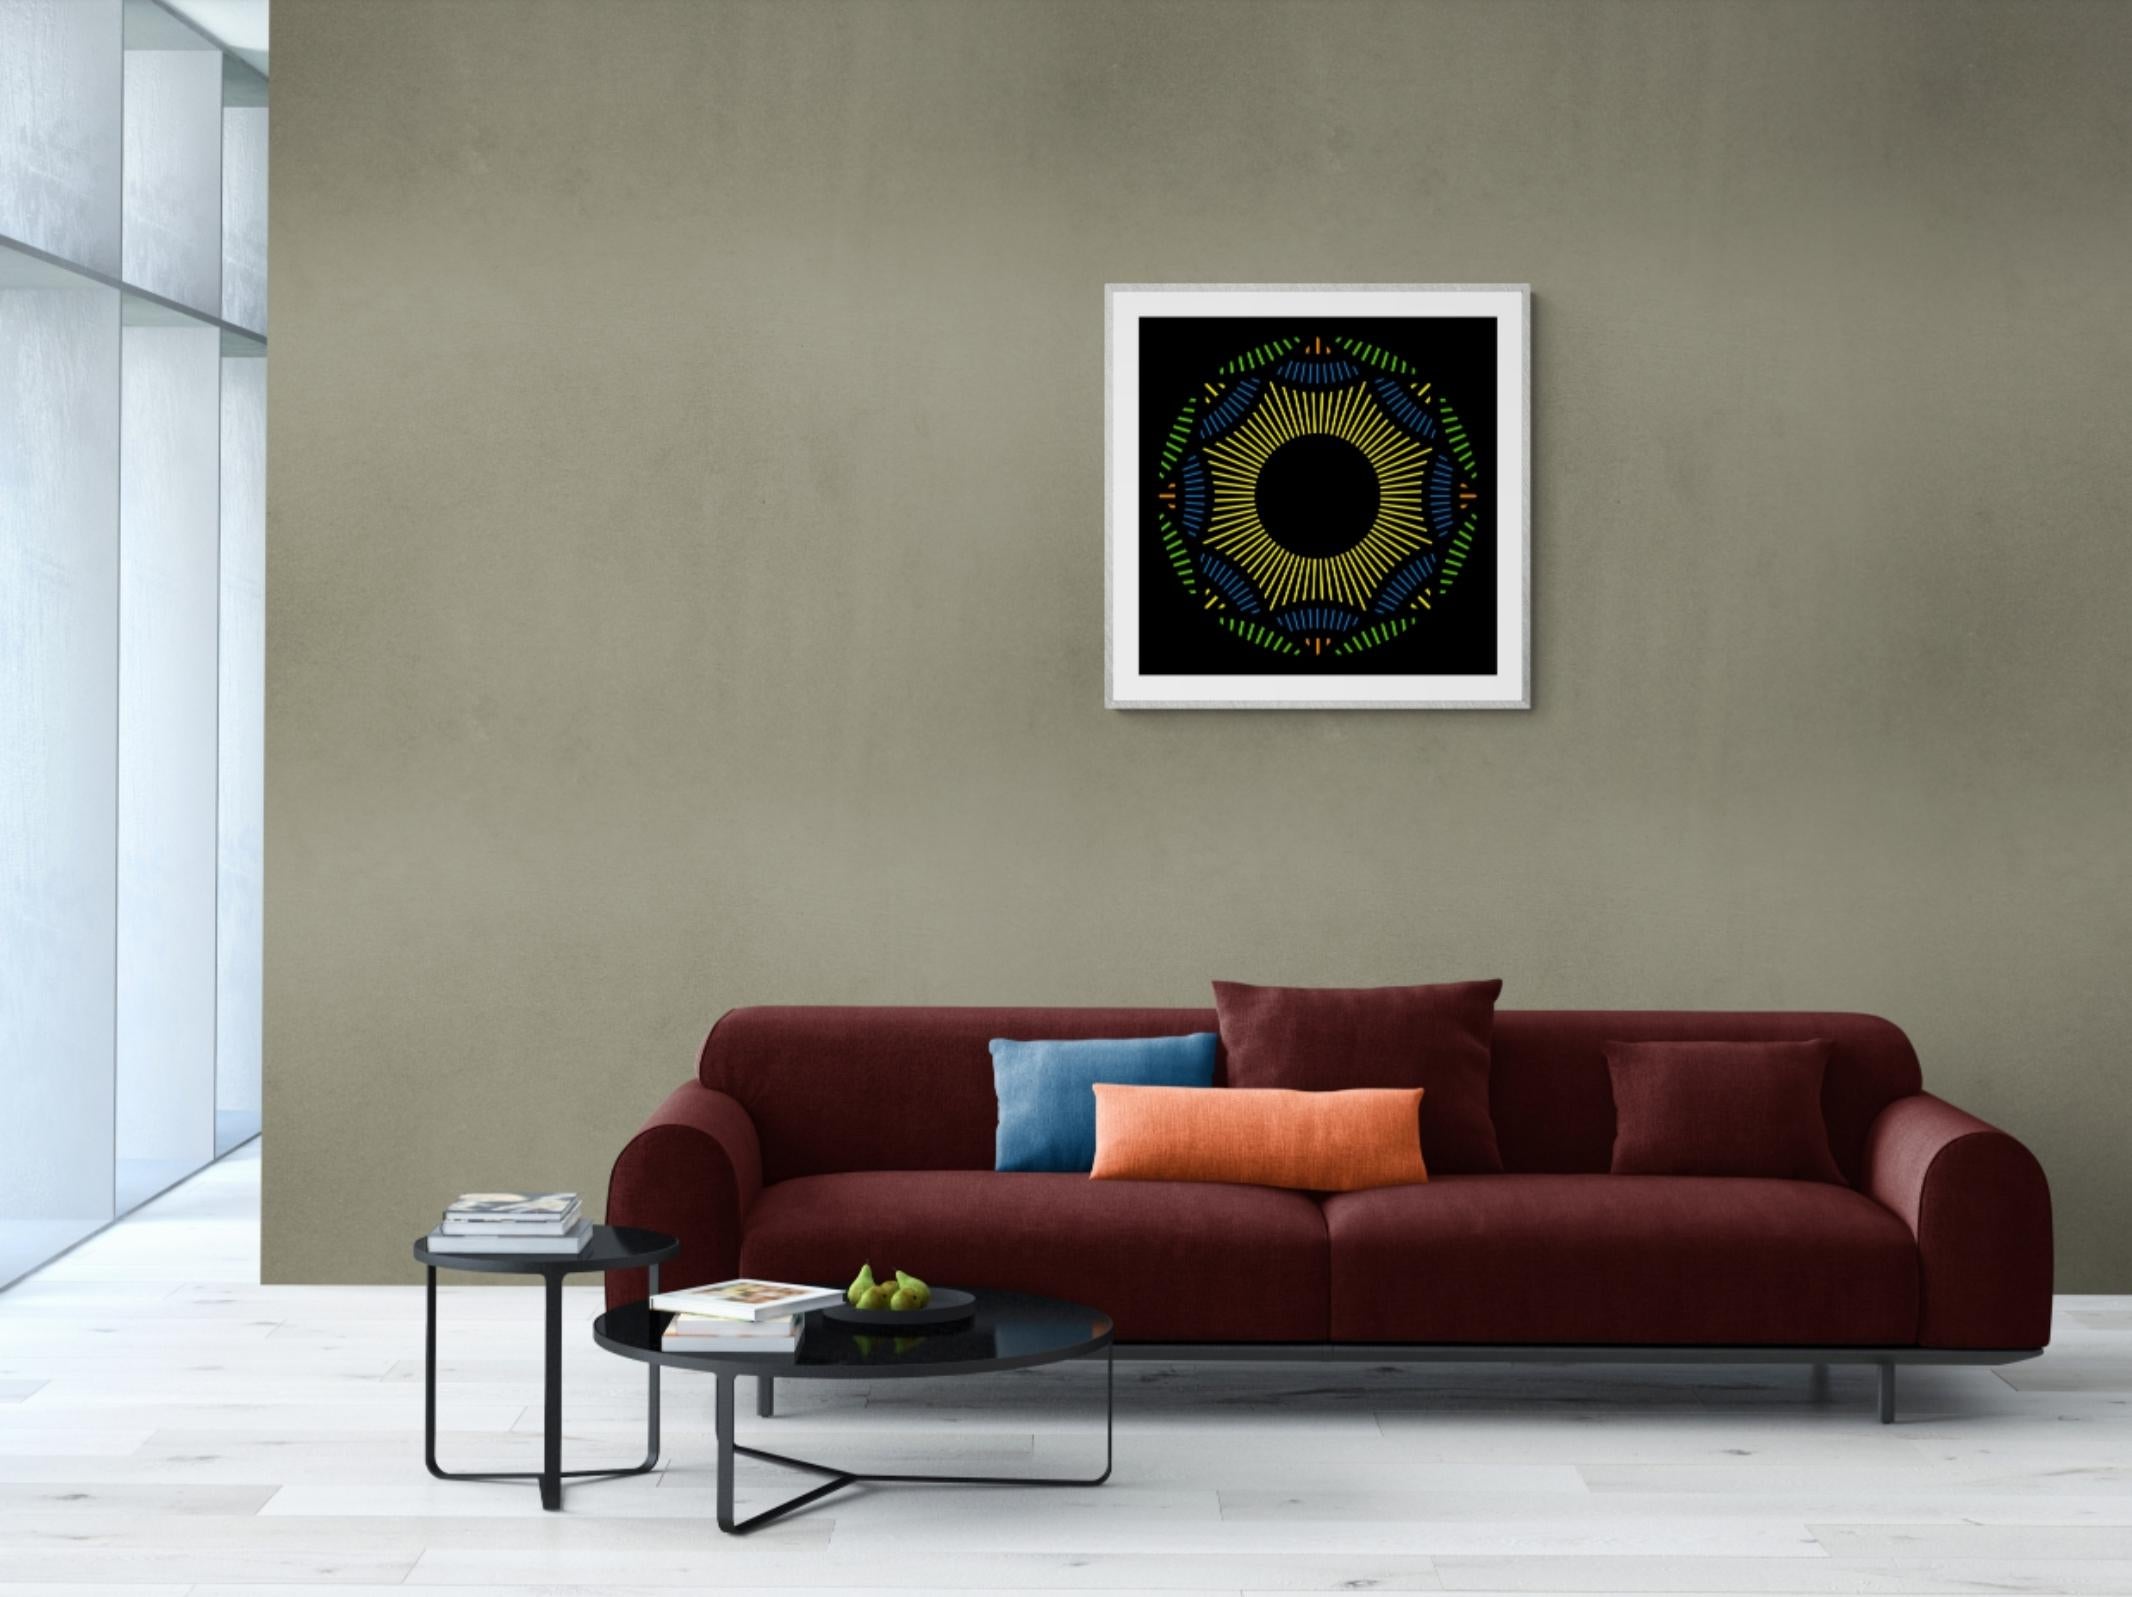 Nebulosa 30 - Black Abstract Print by Julio Campos